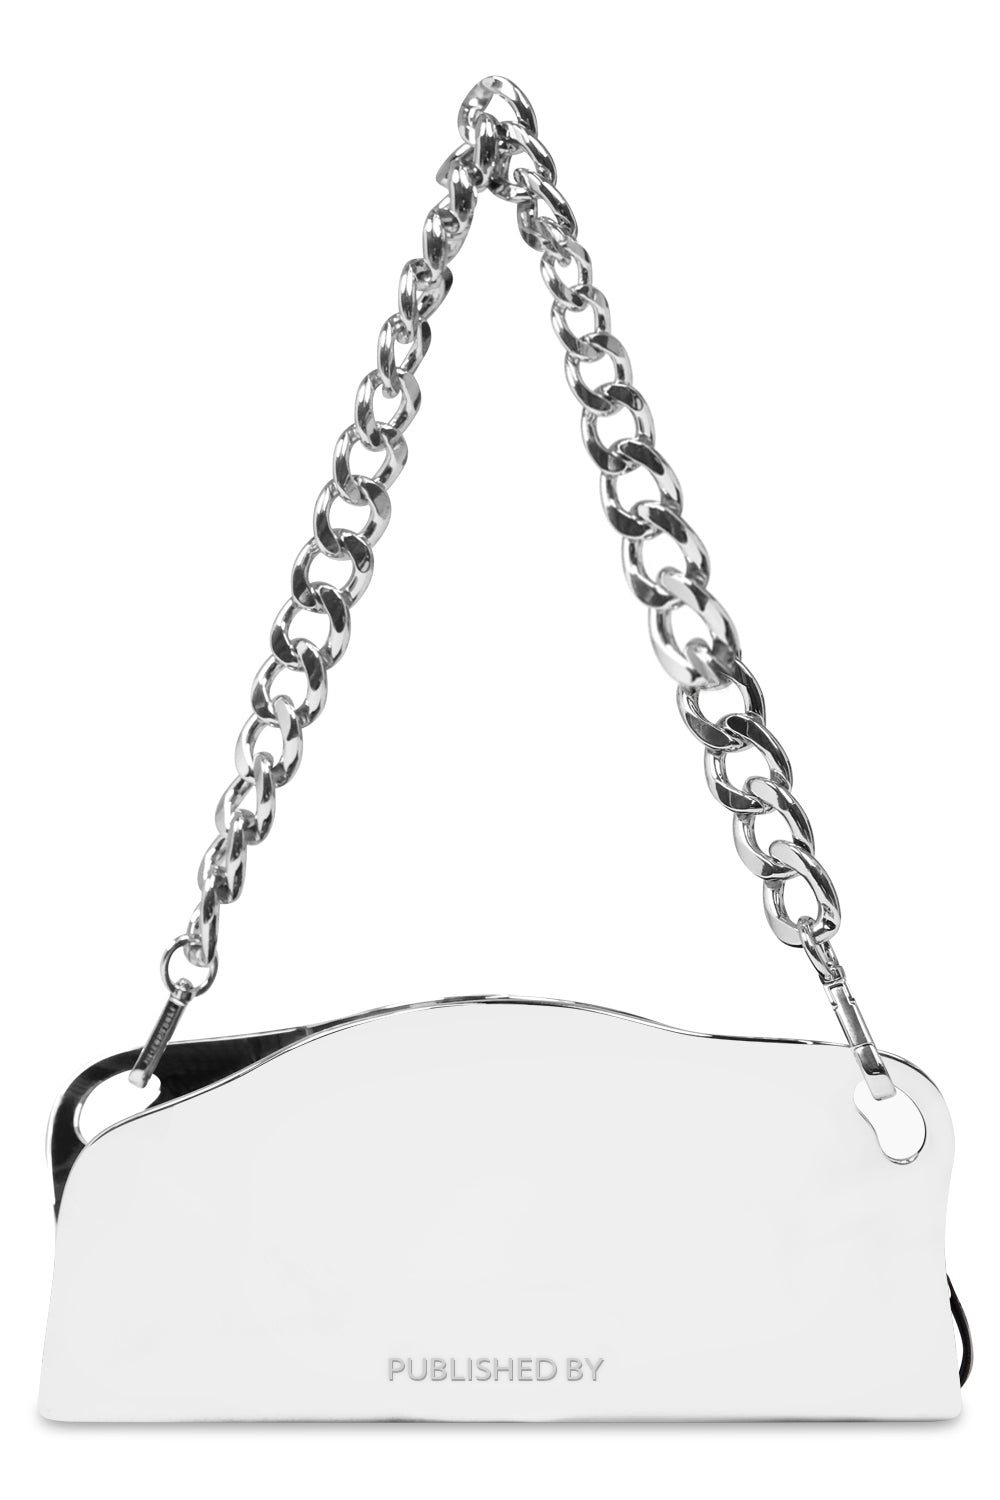 PUBLISHED BY BAGS Silver MAYZIE BAG | CHROME